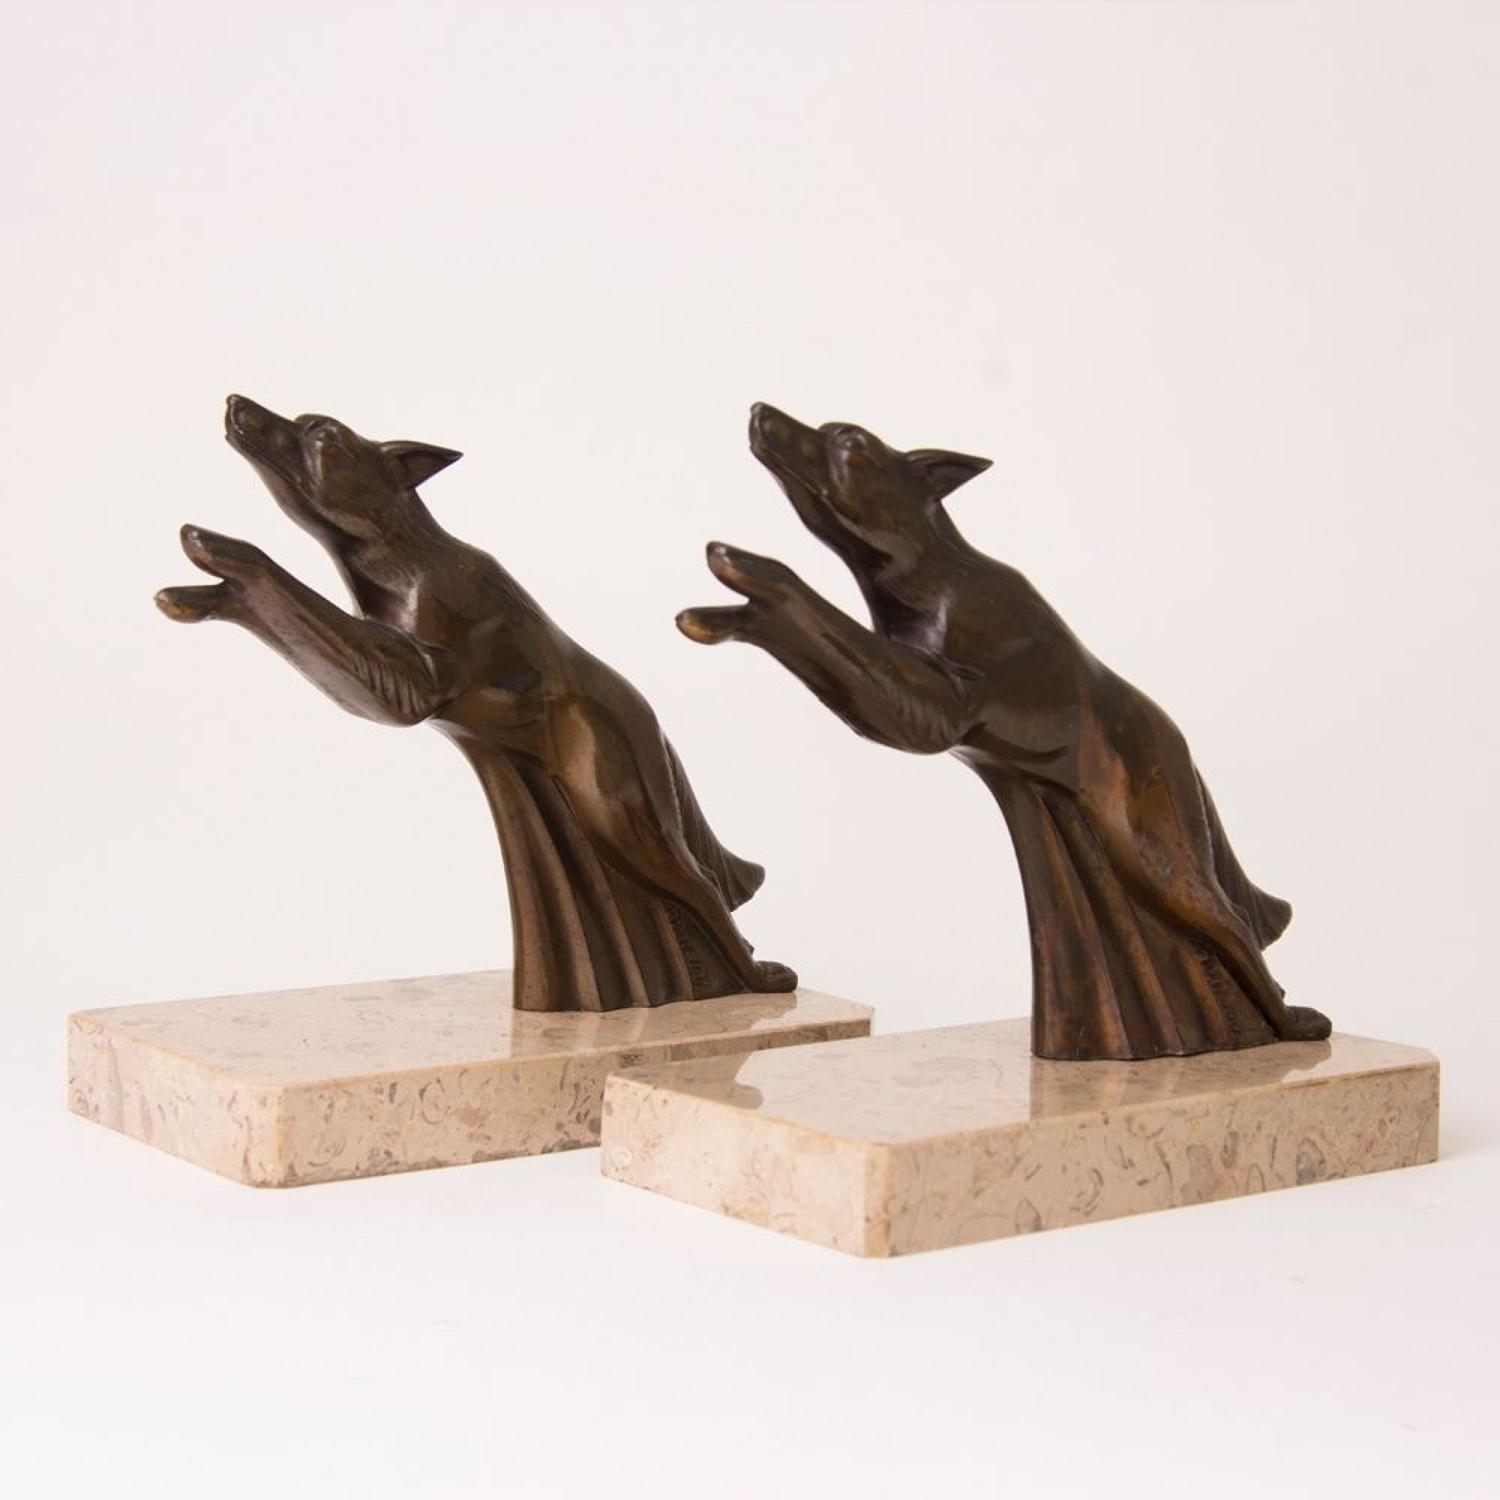 Pair of 1920’s Art Deco Bookends